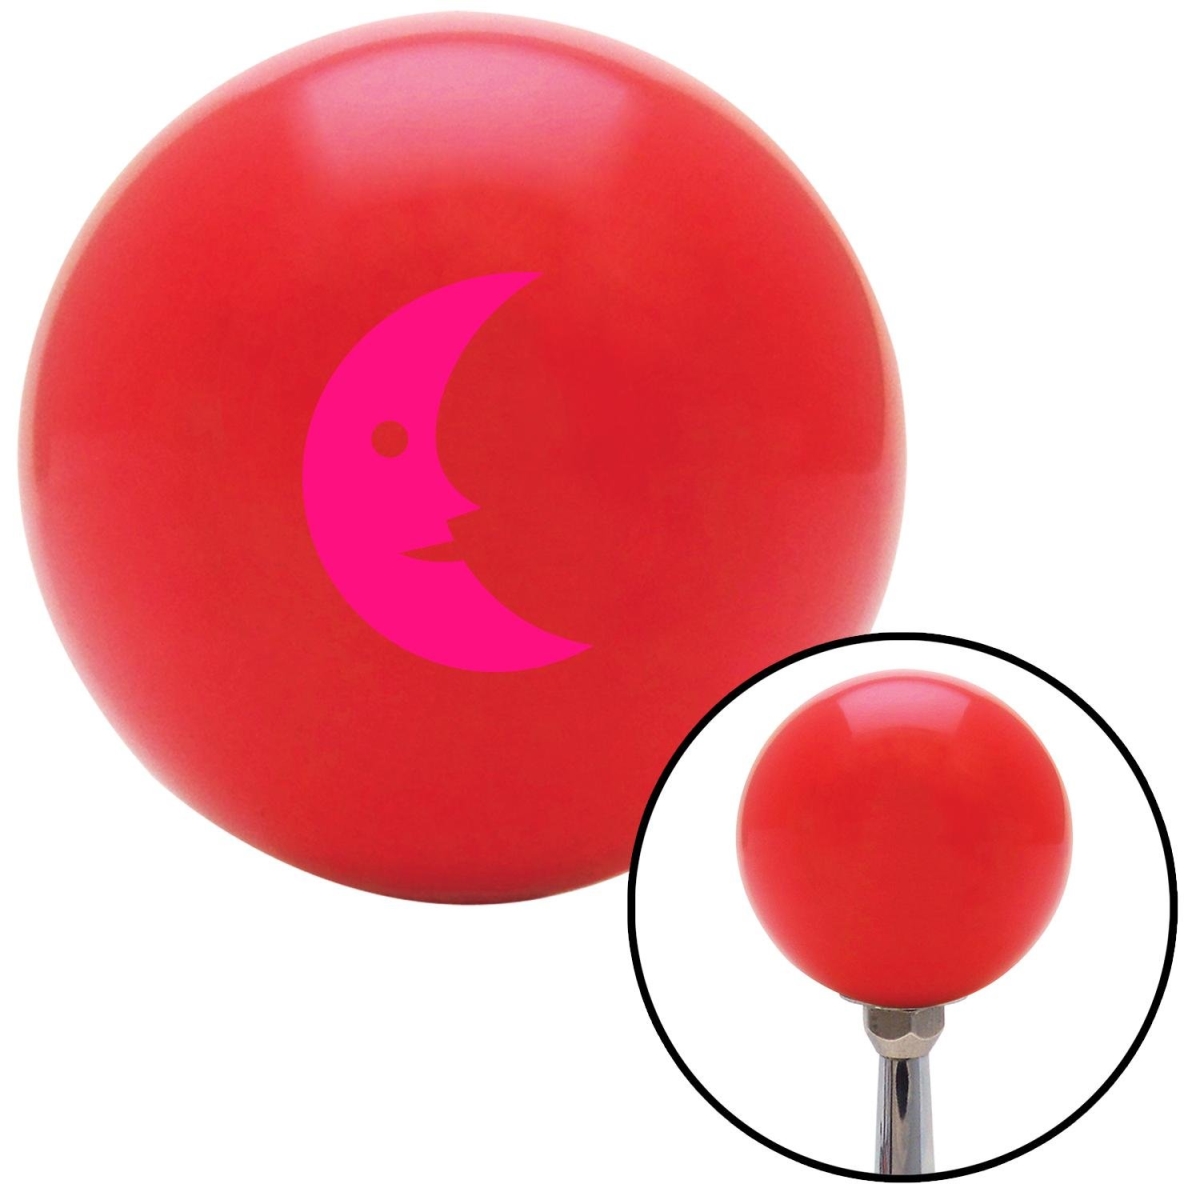 Picture of American Shifter 101372 Pink Crescent Moon Smiling Red Shift Knob with M16 x 1.5 Insert Shifter Auto Manual